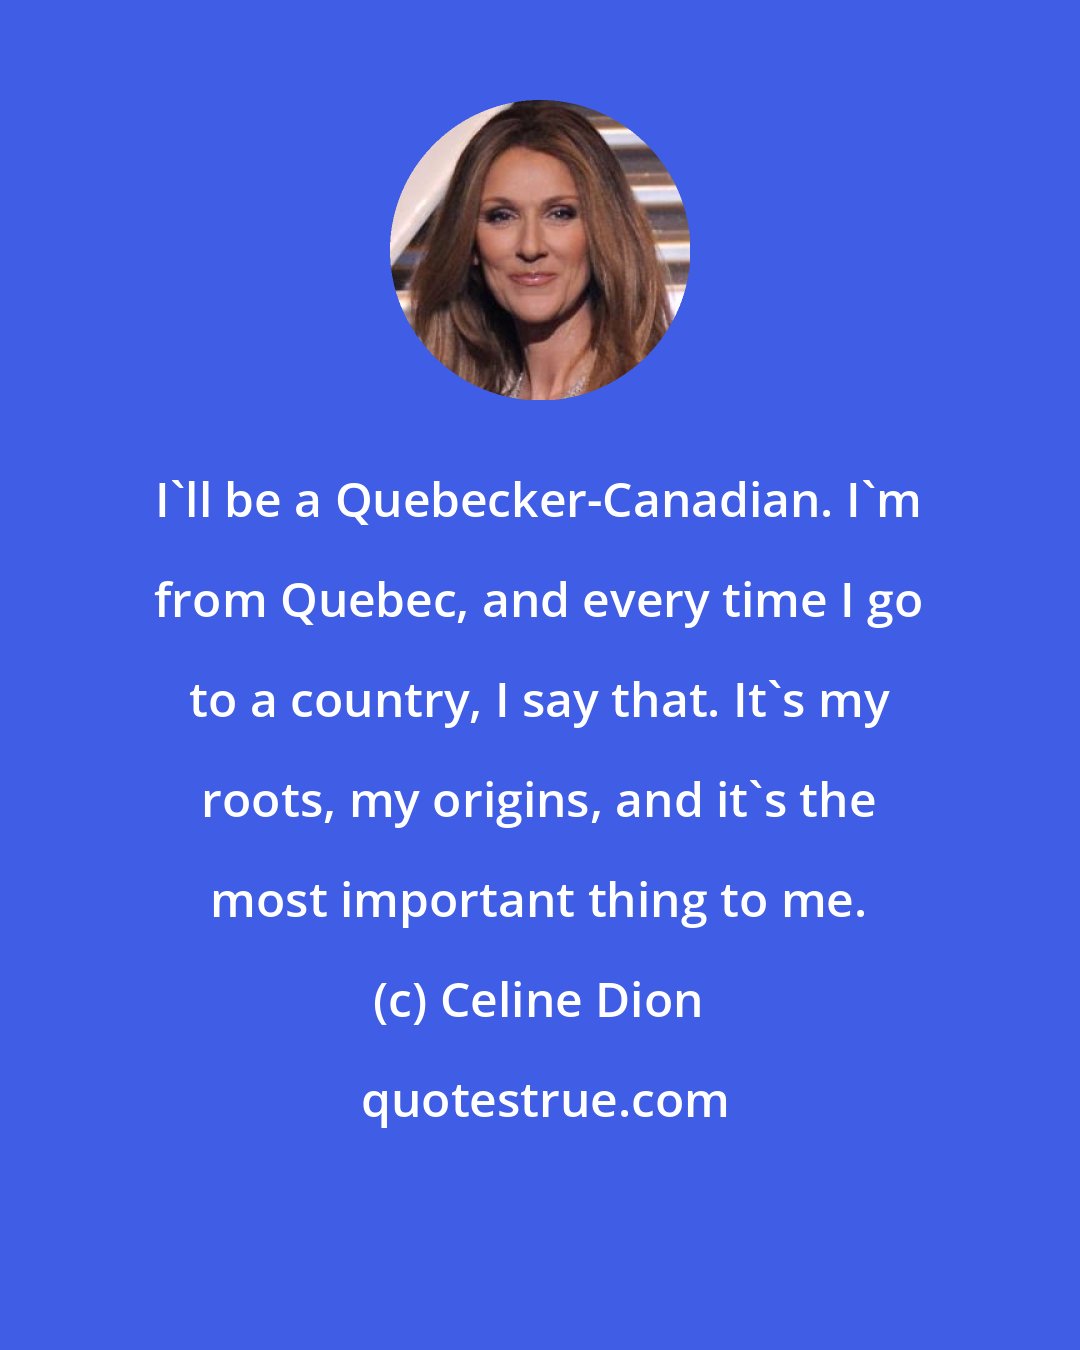 Celine Dion: I'll be a Quebecker-Canadian. I'm from Quebec, and every time I go to a country, I say that. It's my roots, my origins, and it's the most important thing to me.